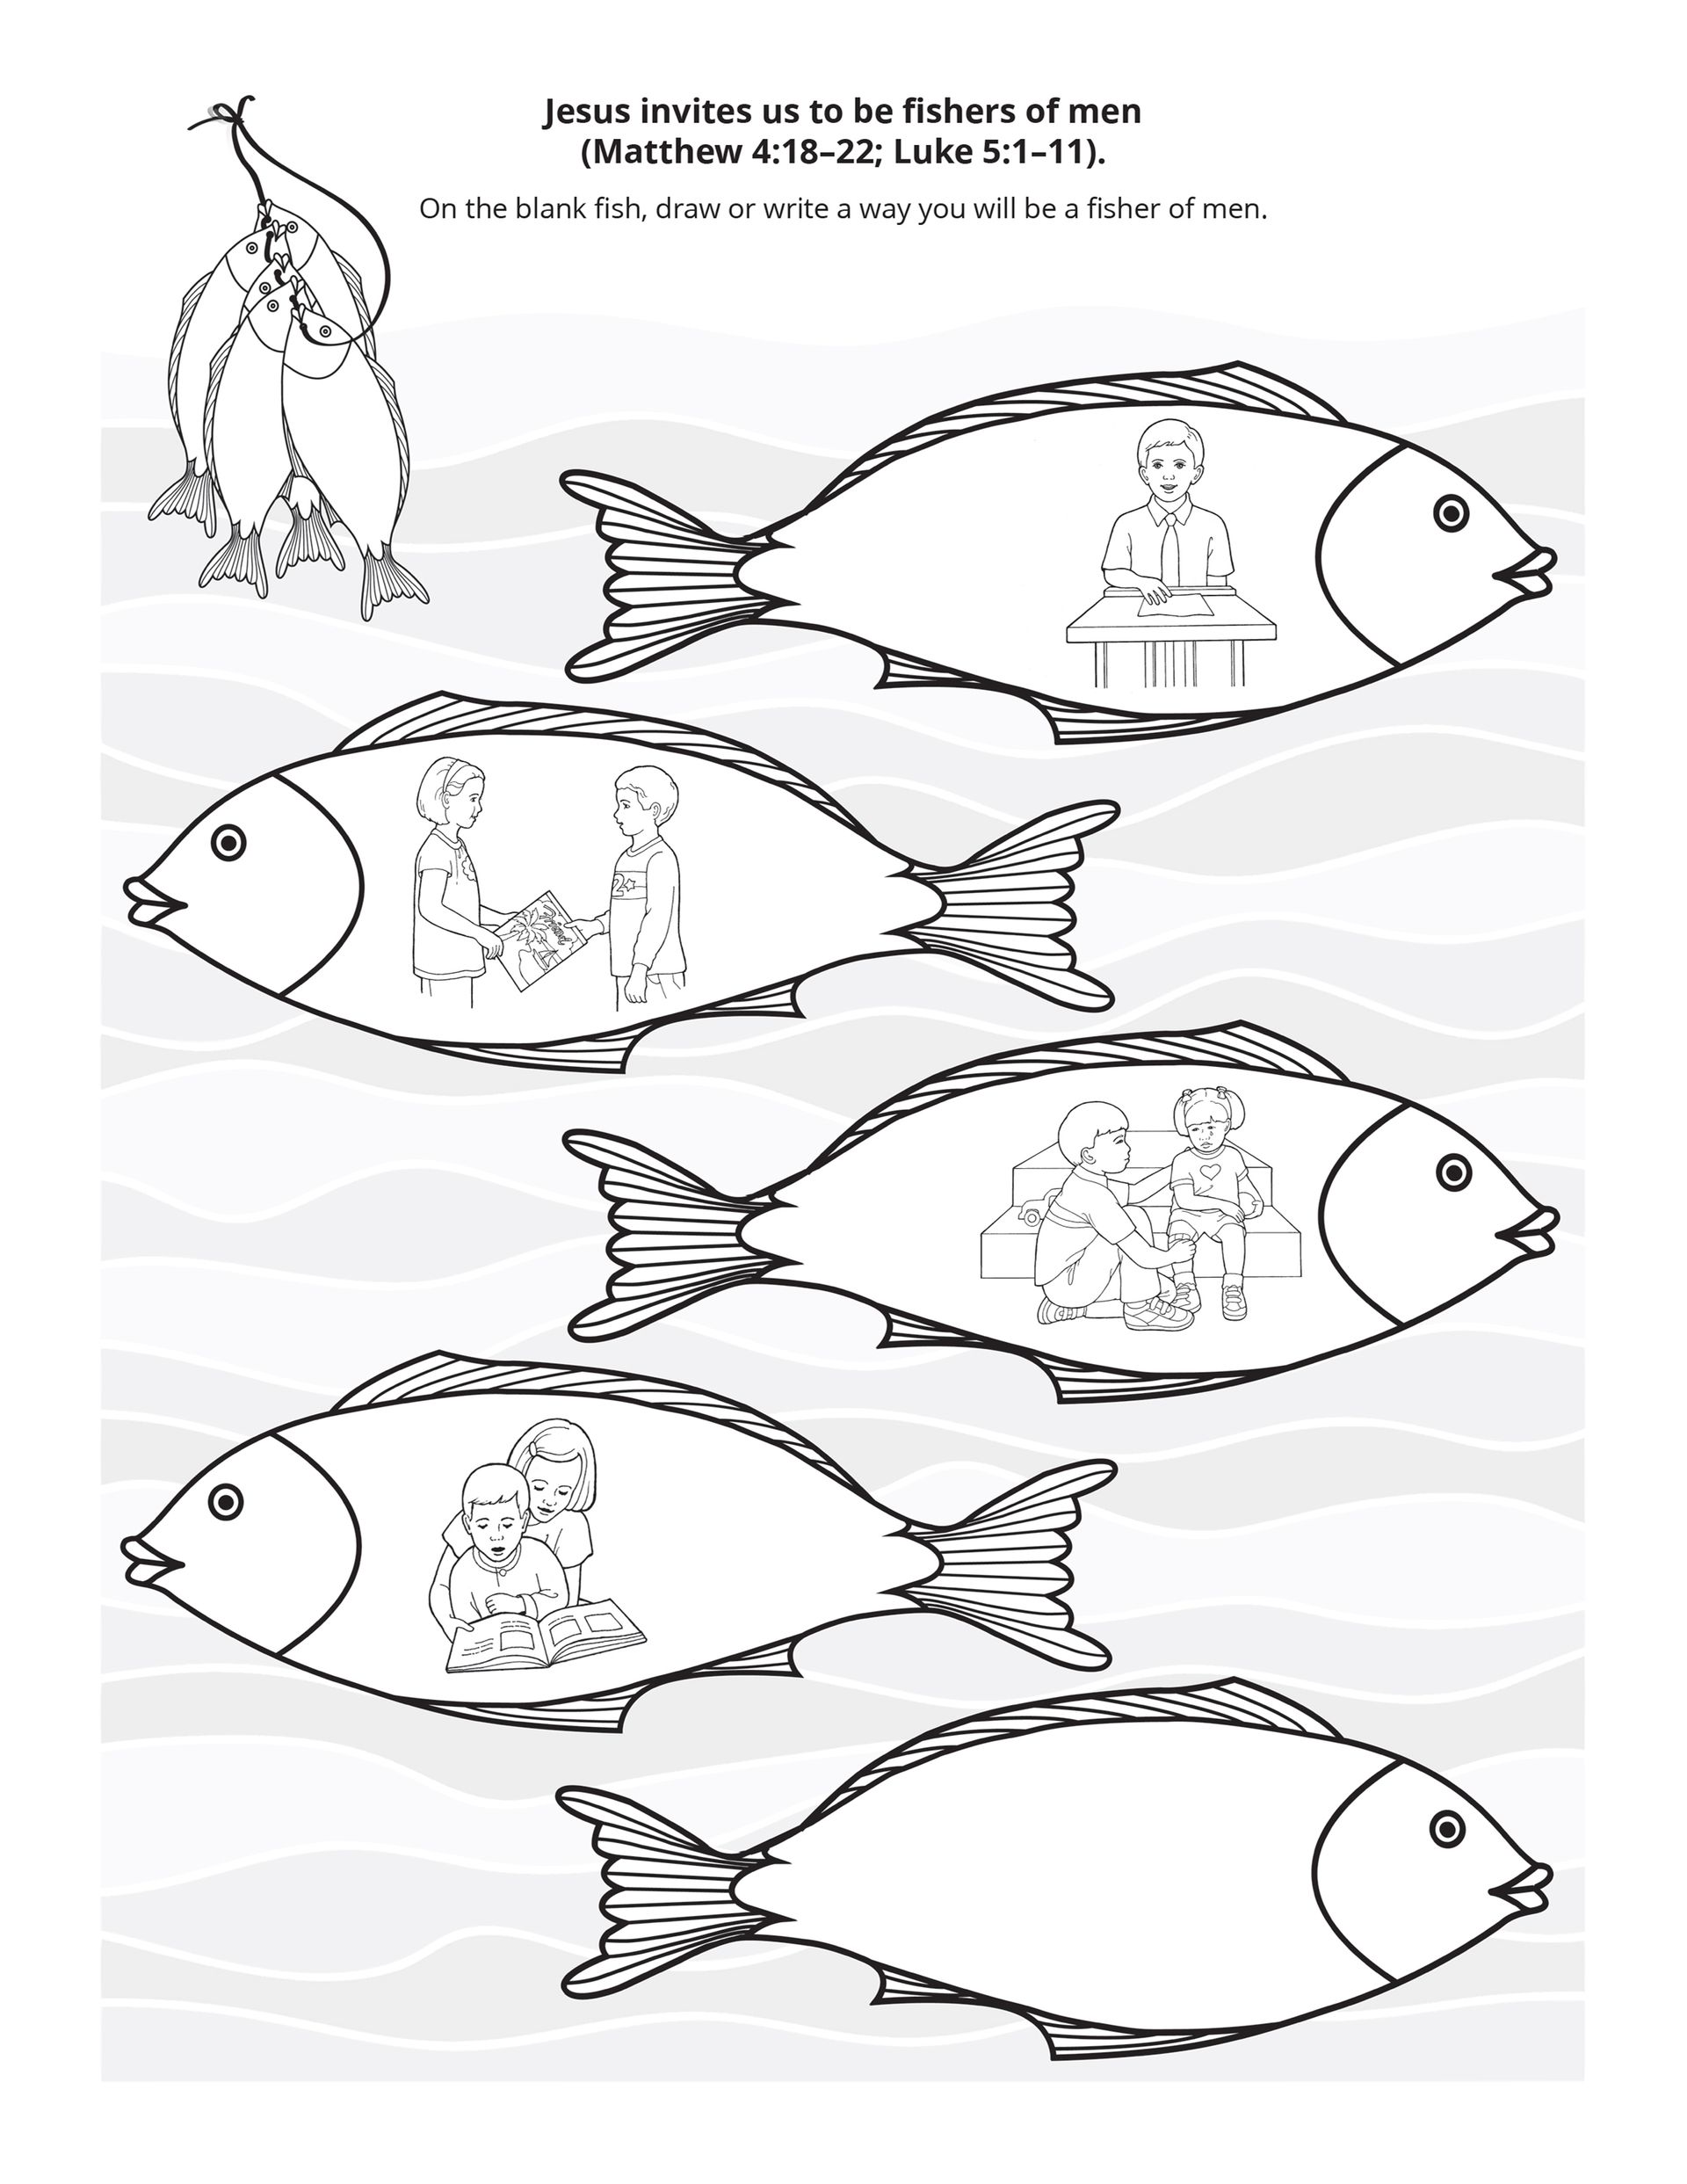 An illustration of fish with examples of how to be fishers of men.